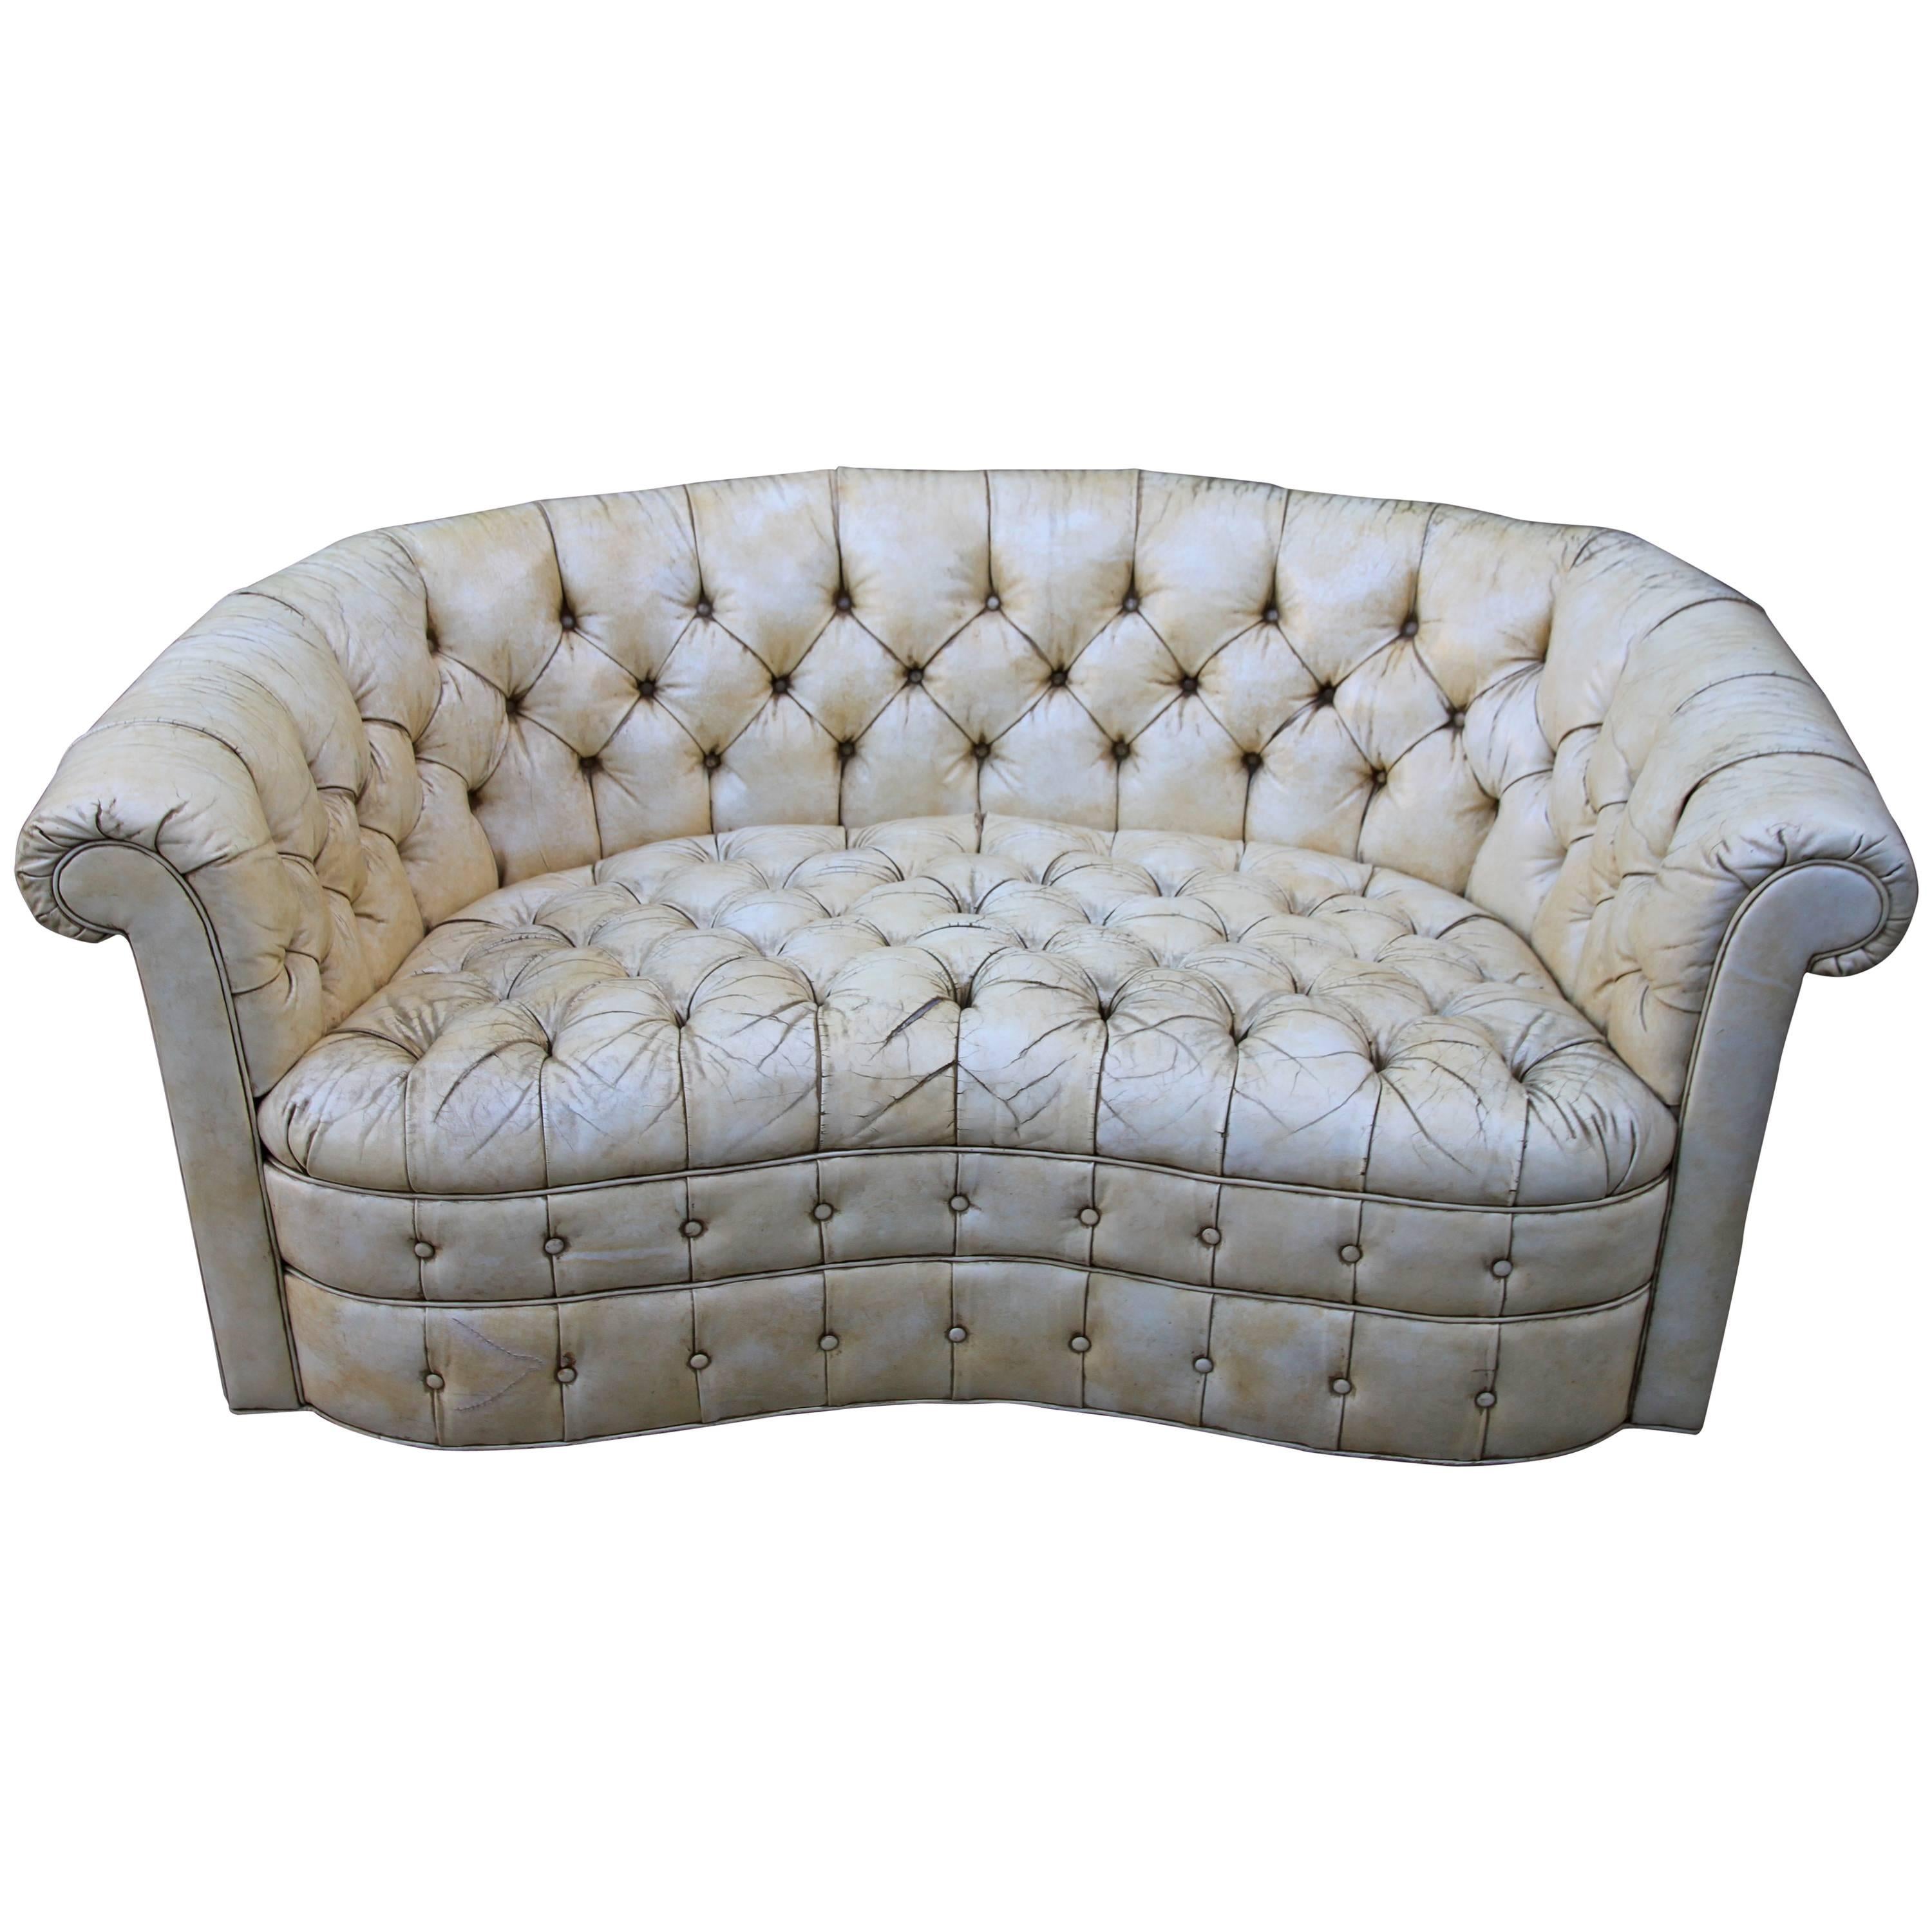 Leather Tufted Chesterfield Style Love Seat